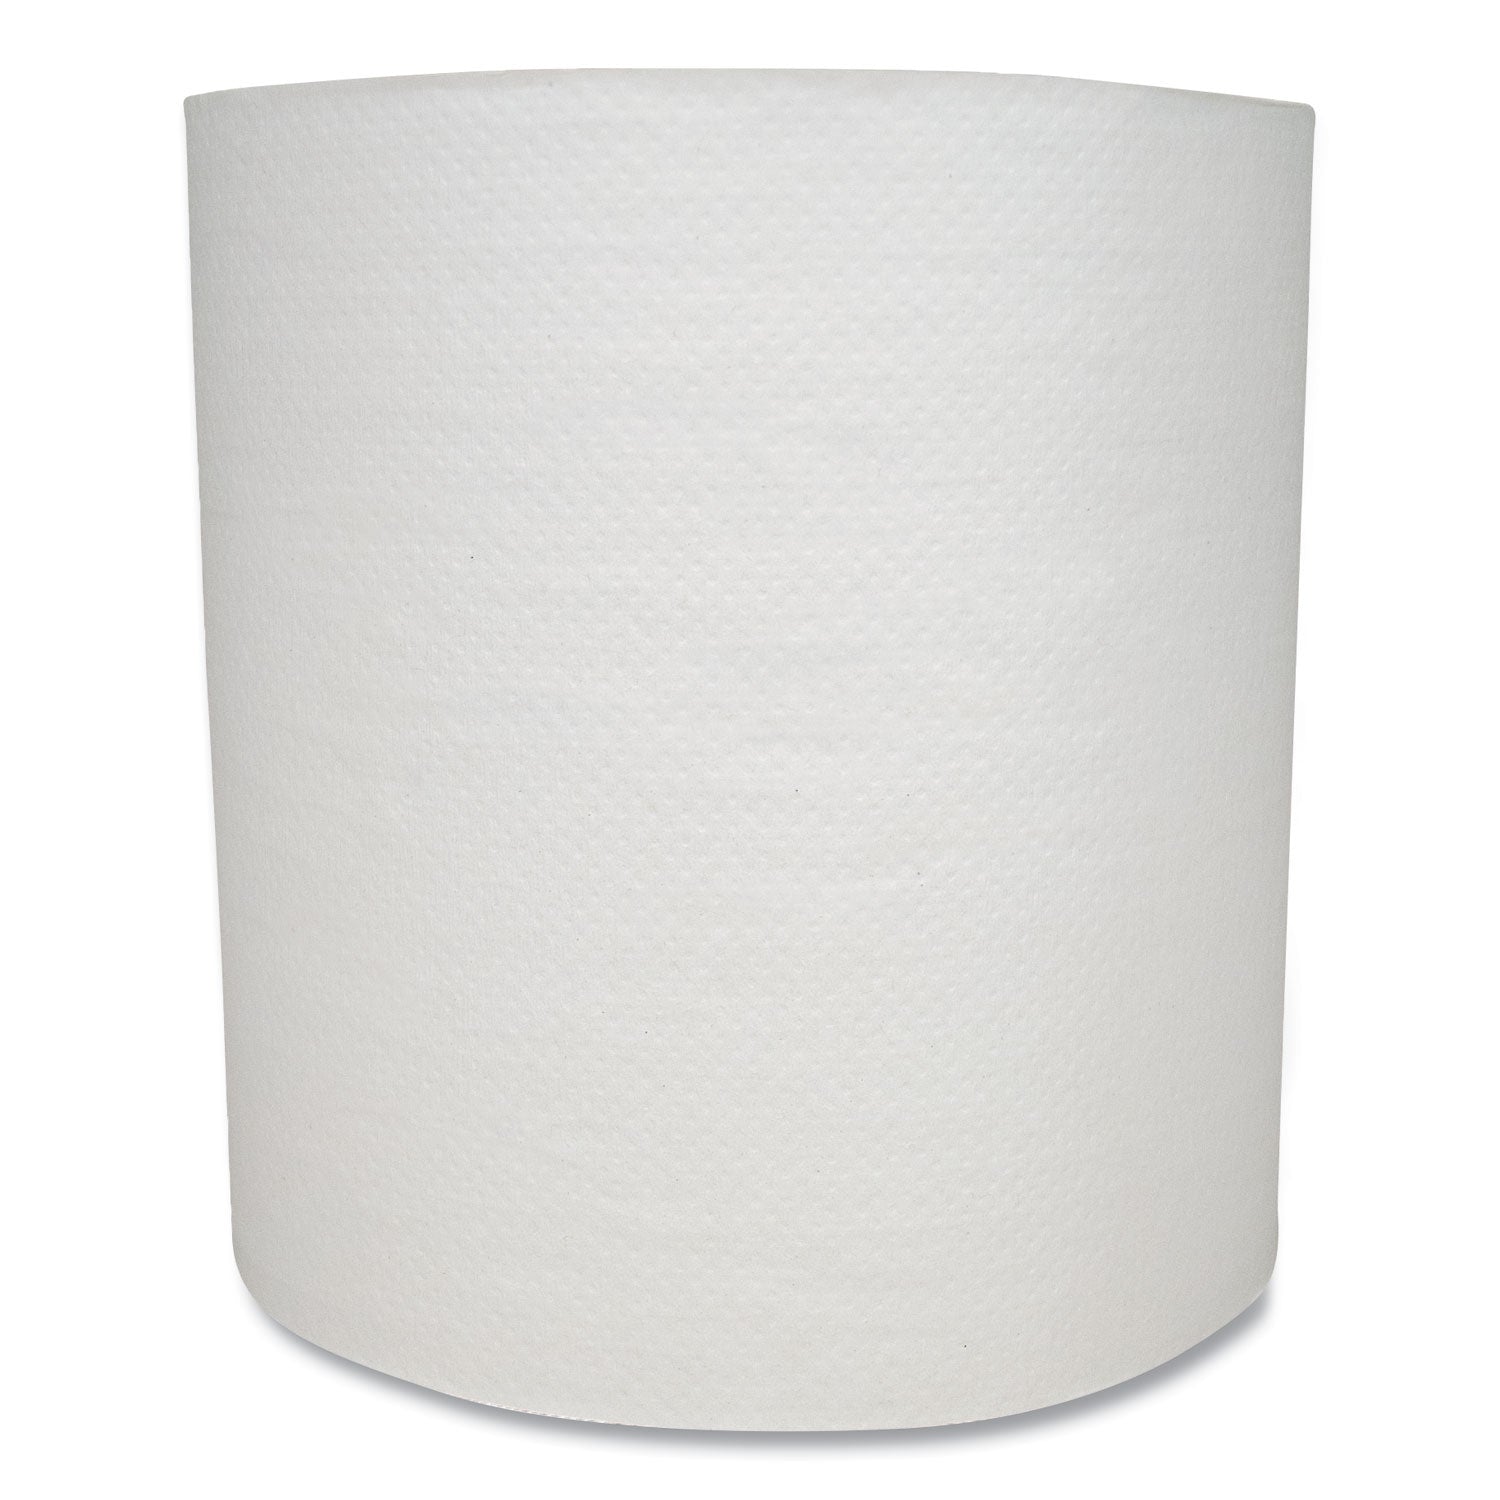 morsoft-universal-roll-towels-1-ply-8-x-700-ft-white-6-rolls-carton_mor6700w - 1